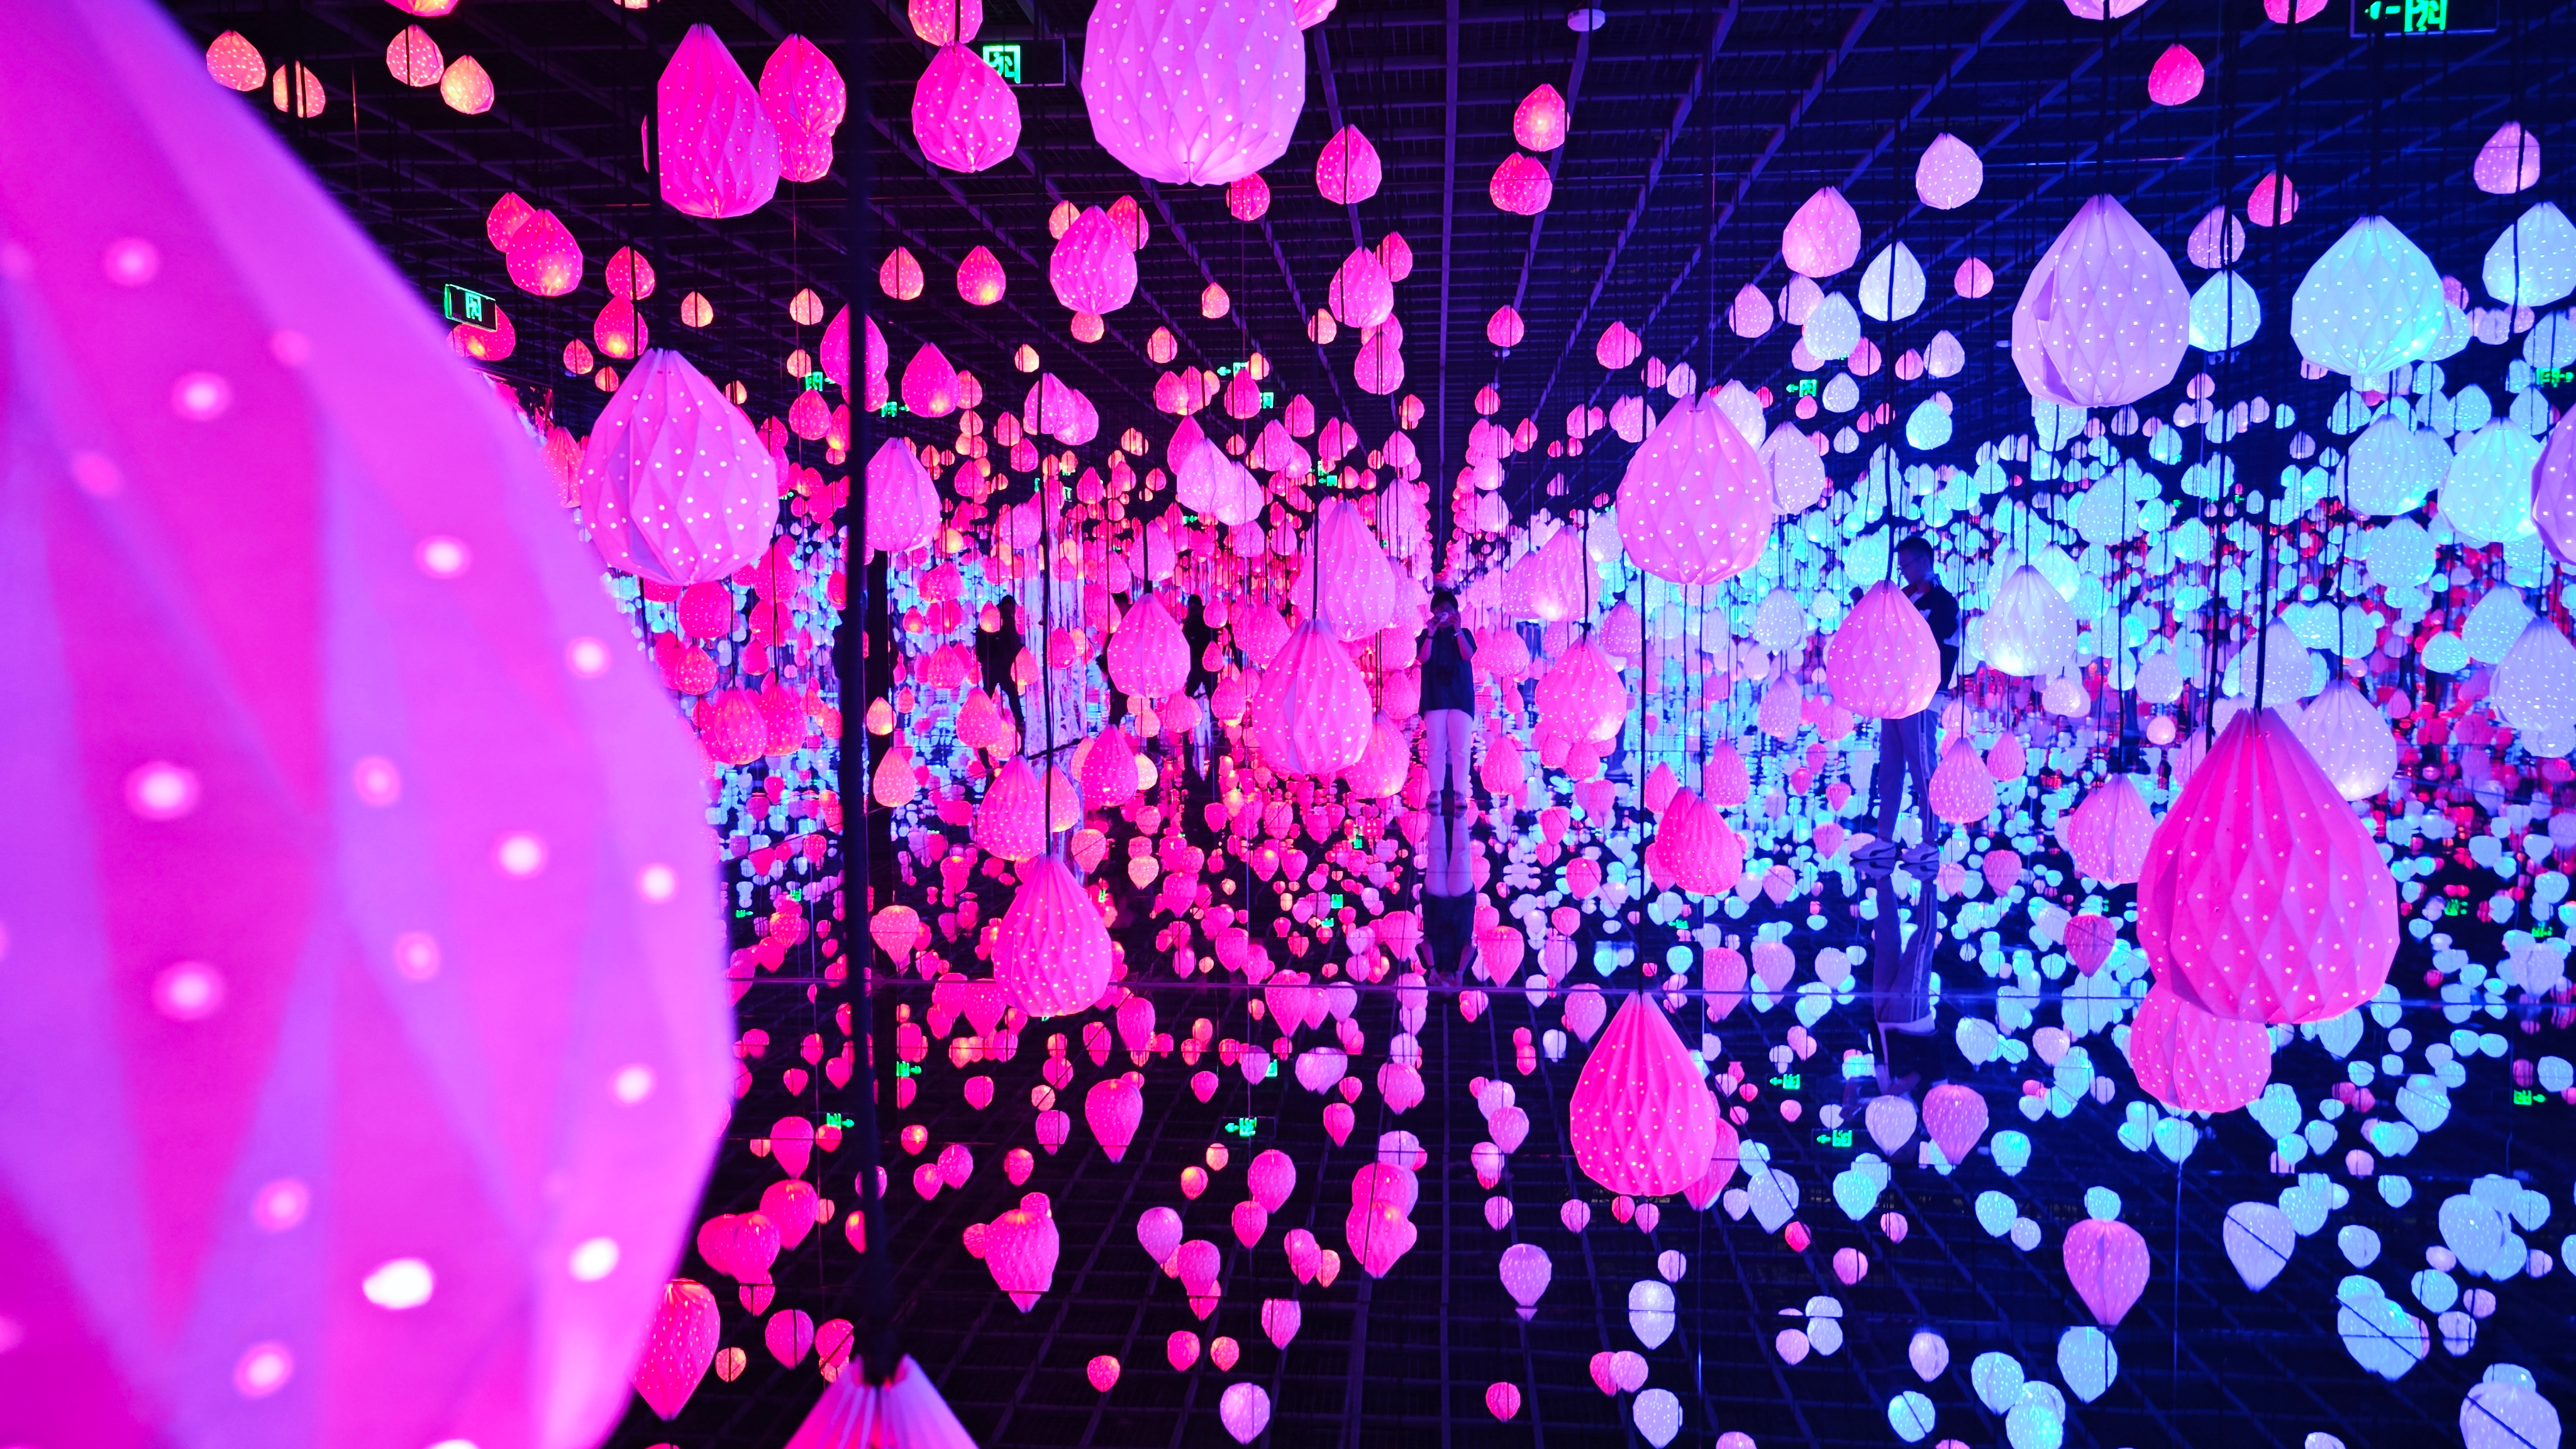 Live: Experience an immersive, naked-eye 3D exhibition in Chengdu, China